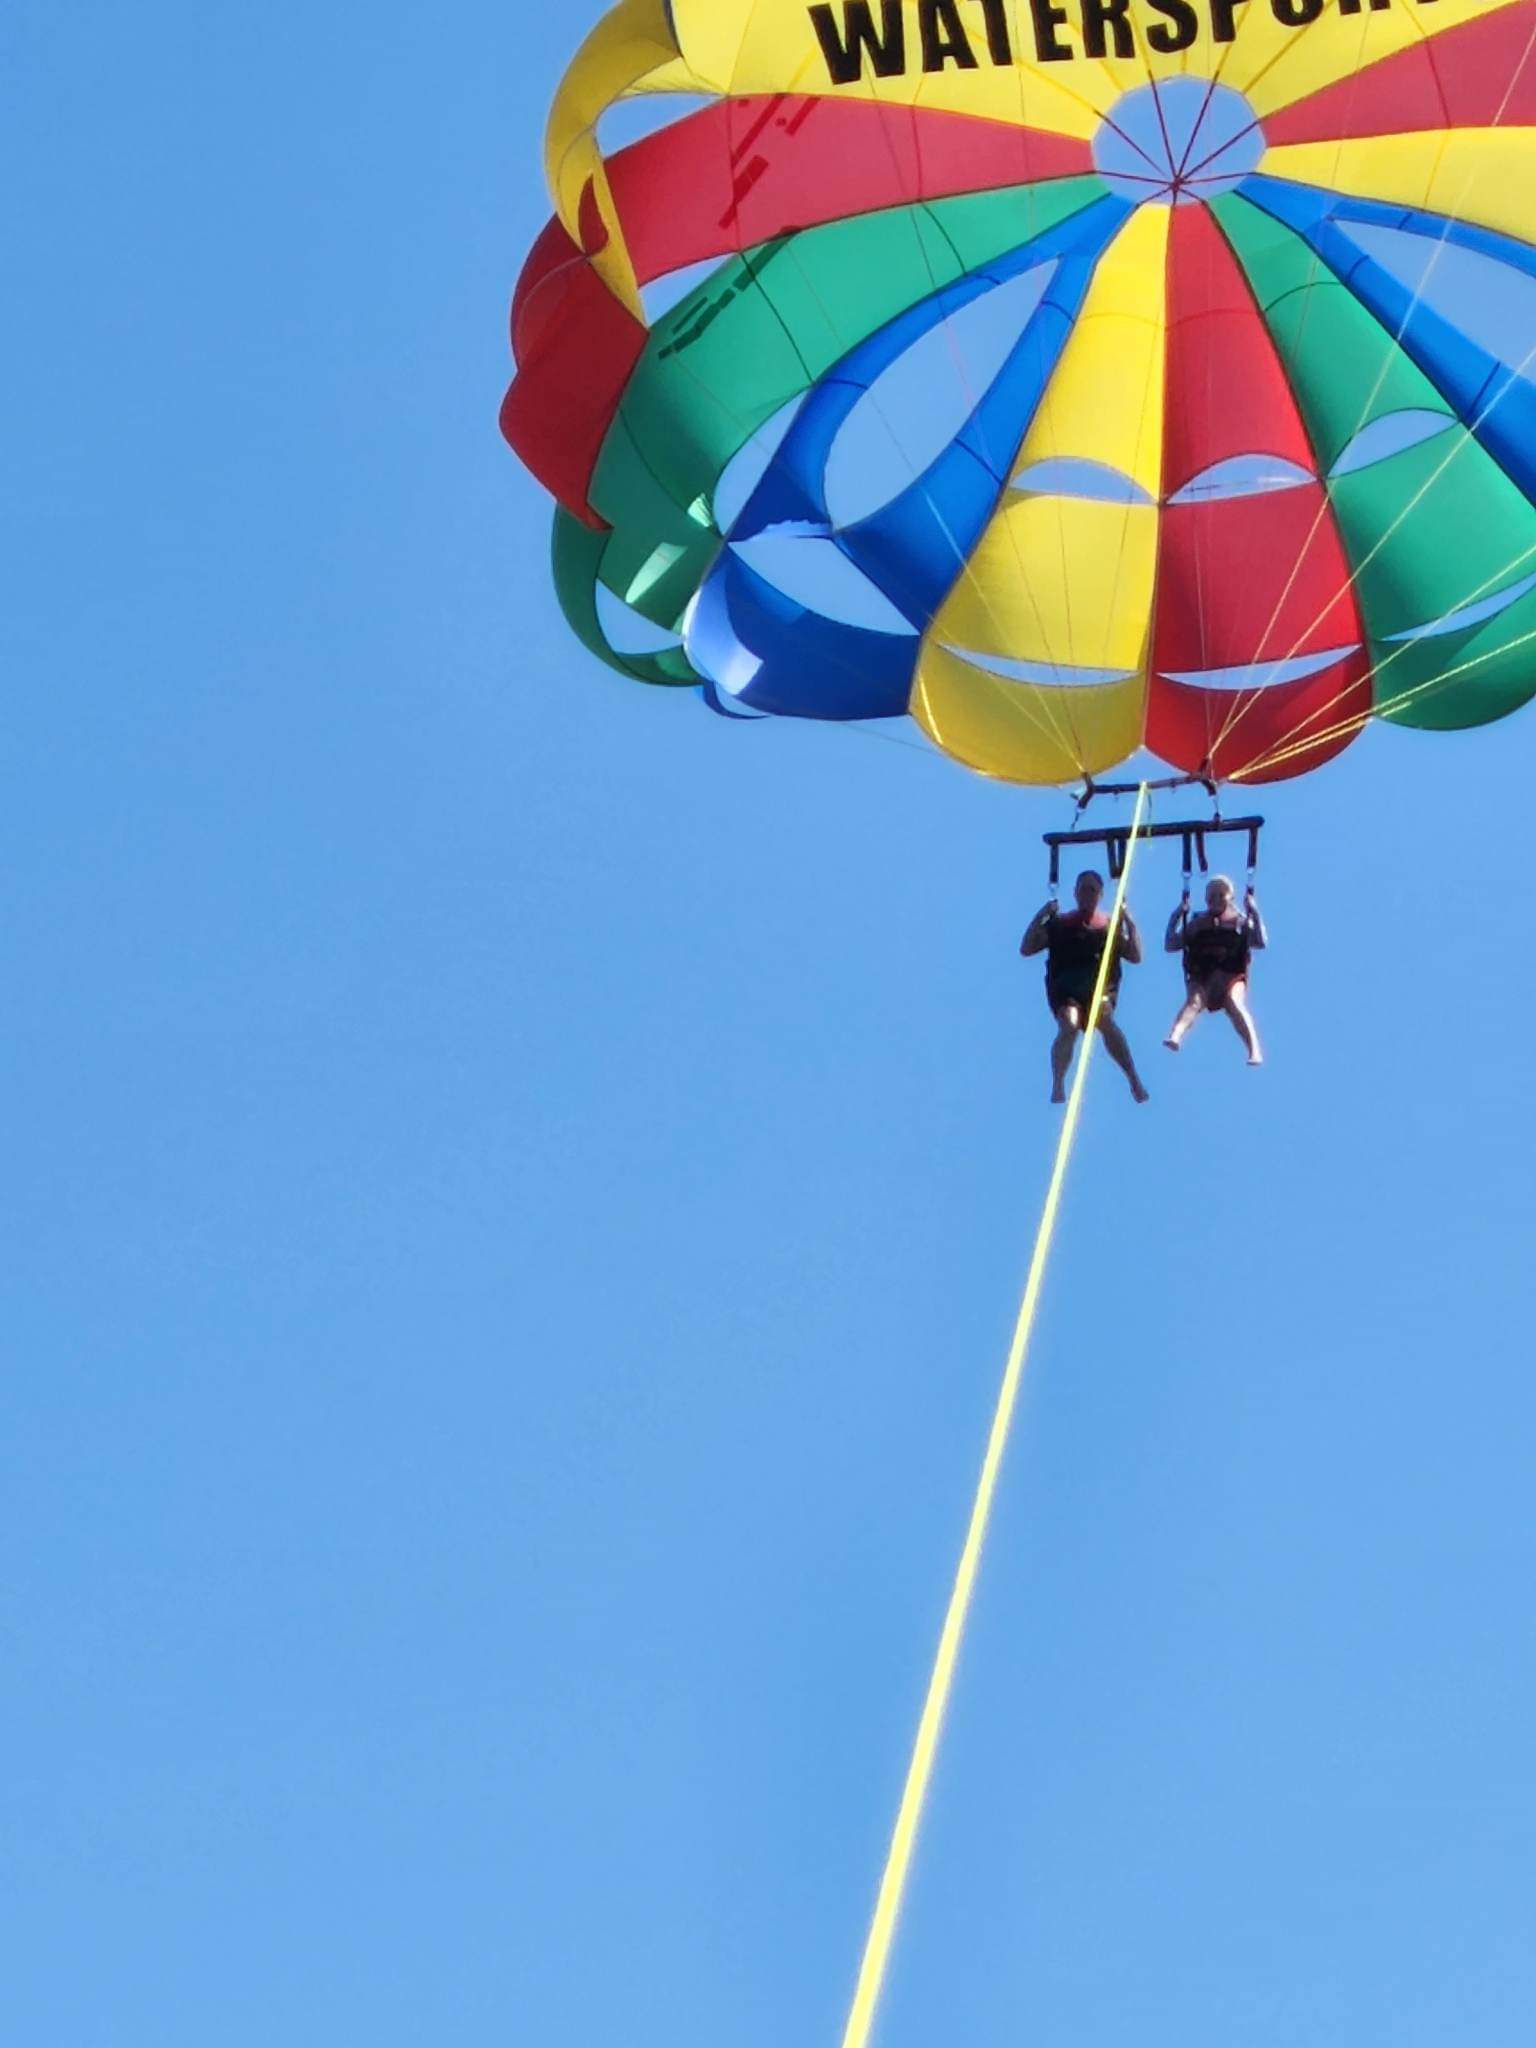 two people are safely harnessed to a parasail against a perfectly blue sky.